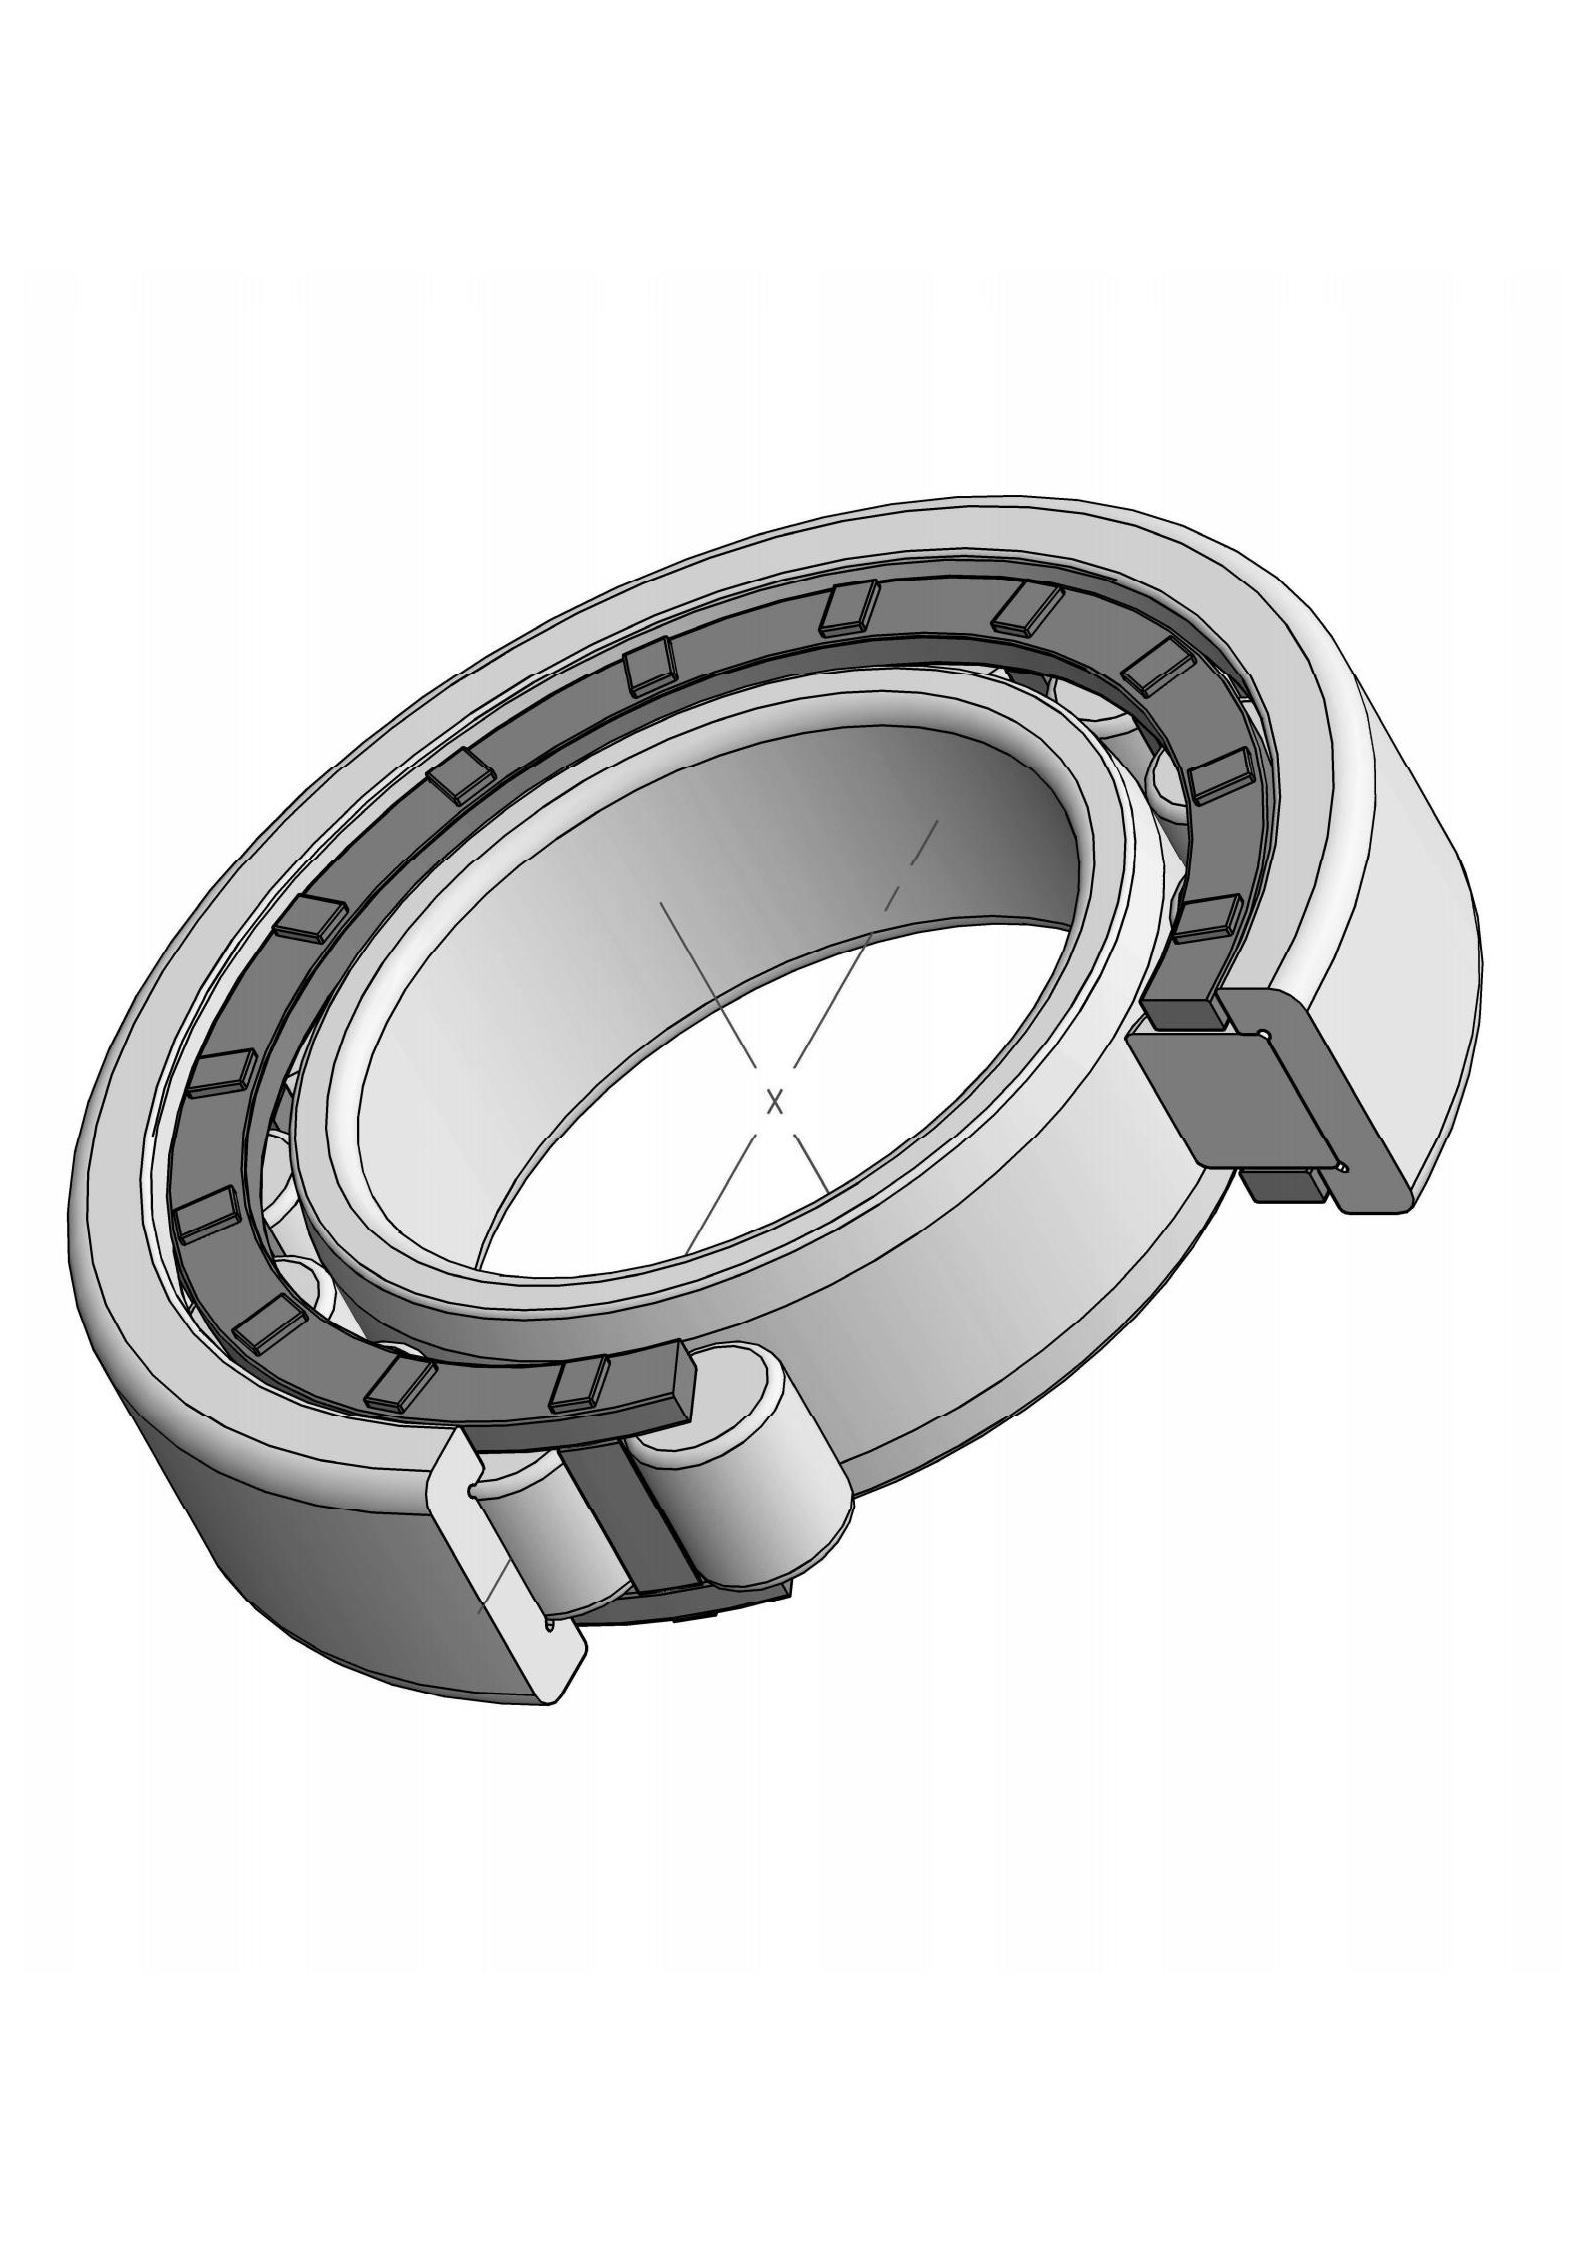 Unlocking the Secrets of a Efficient Four-Point Bearing Technology for Enhanced Performance